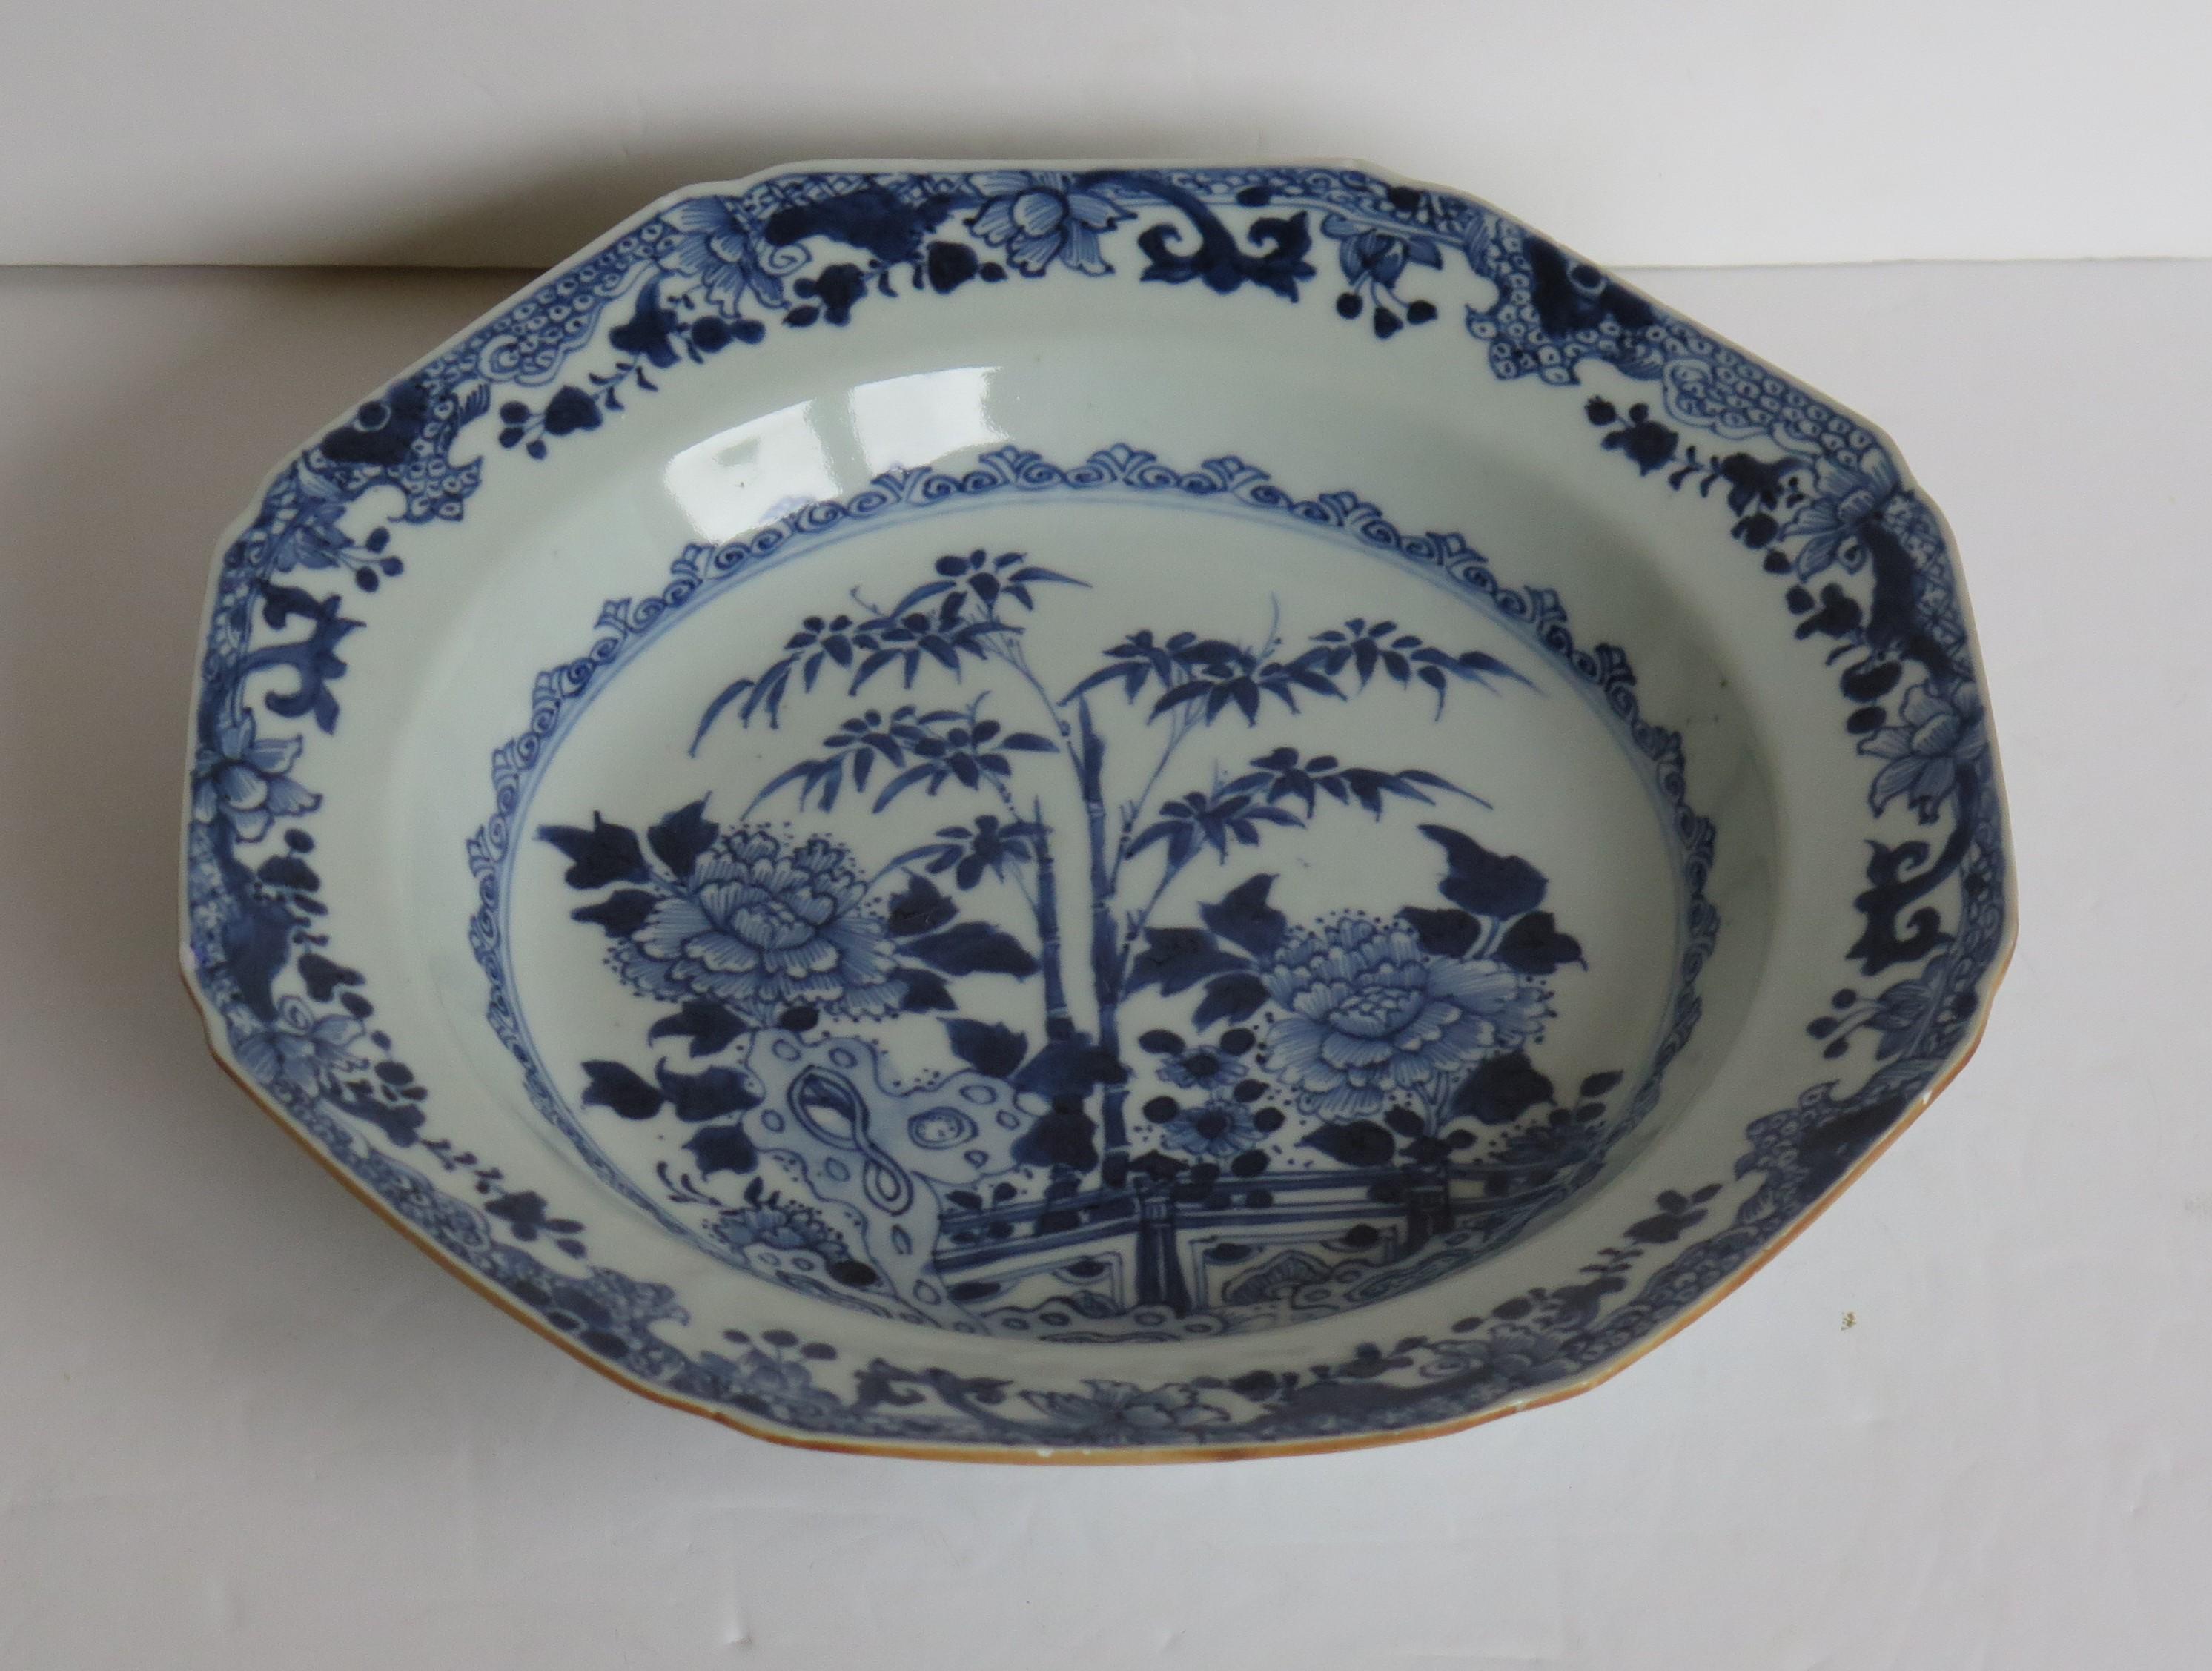 This is a very good Chinese porcelain Soup plate or deep plate made for the export (Canton) market, during the second half of the 18th century, Circa 1770.

The plate is octagonal in shape and well hand decorated in varying shades of cobalt blue,